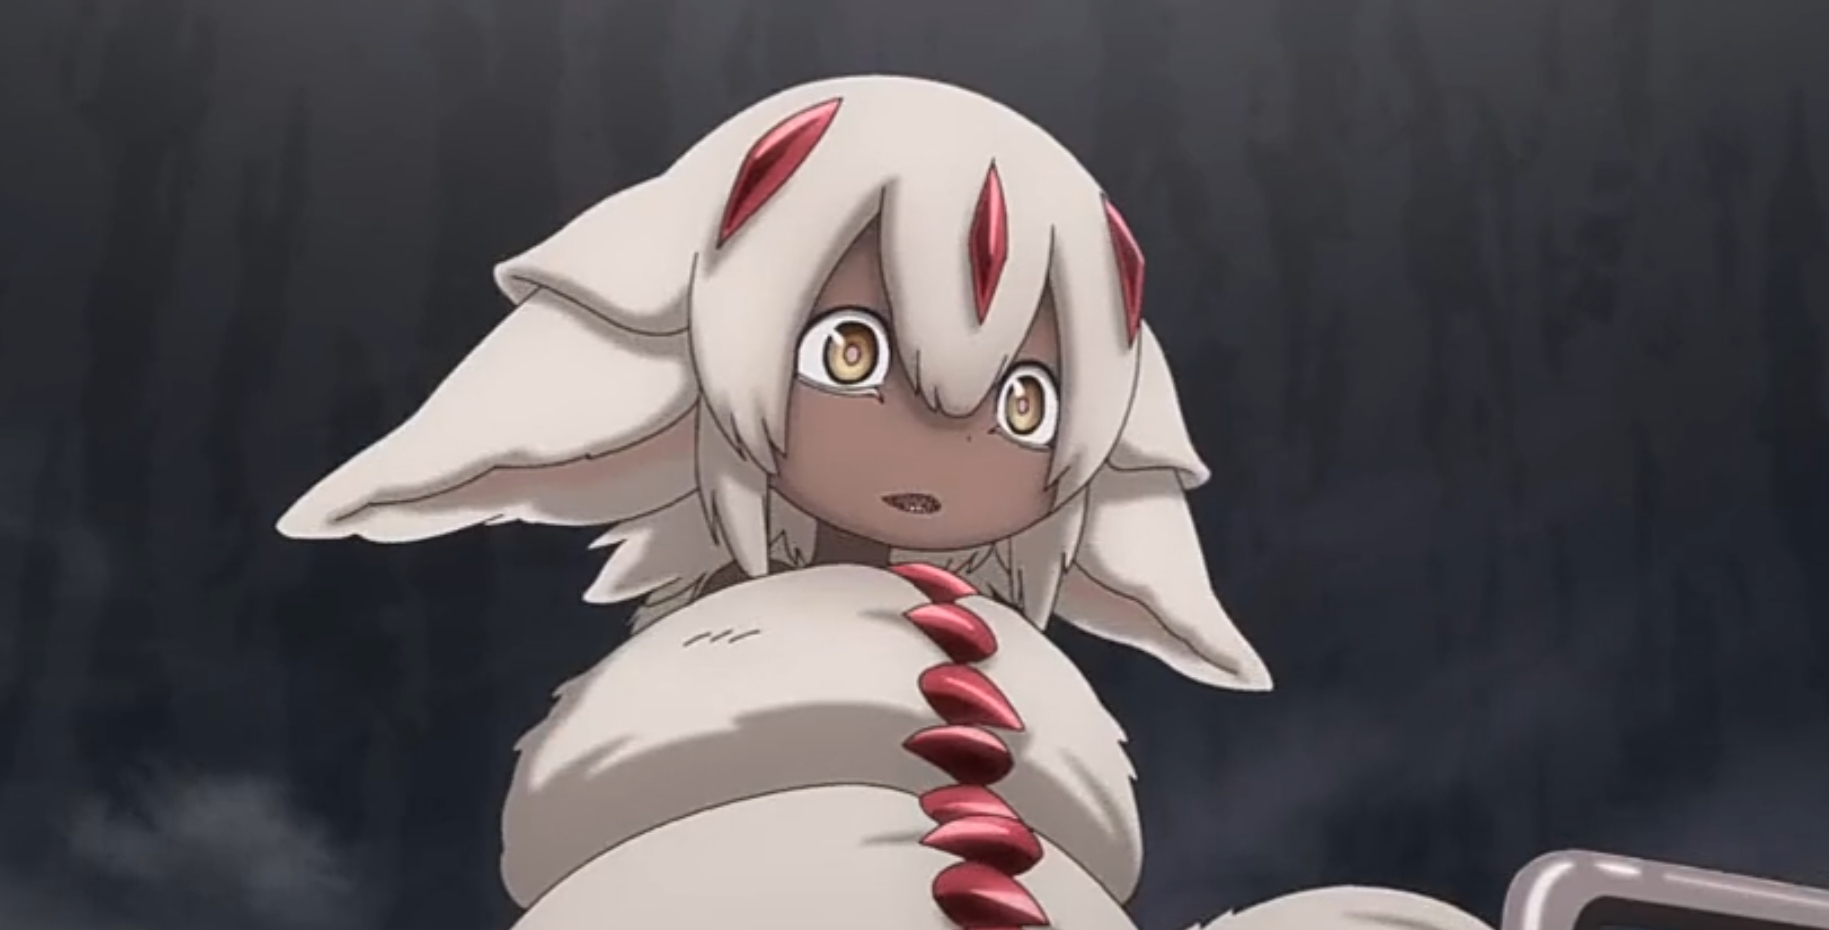 Made in Abyss Season 2 Episode 8 Recap: The Form the Wish Takes